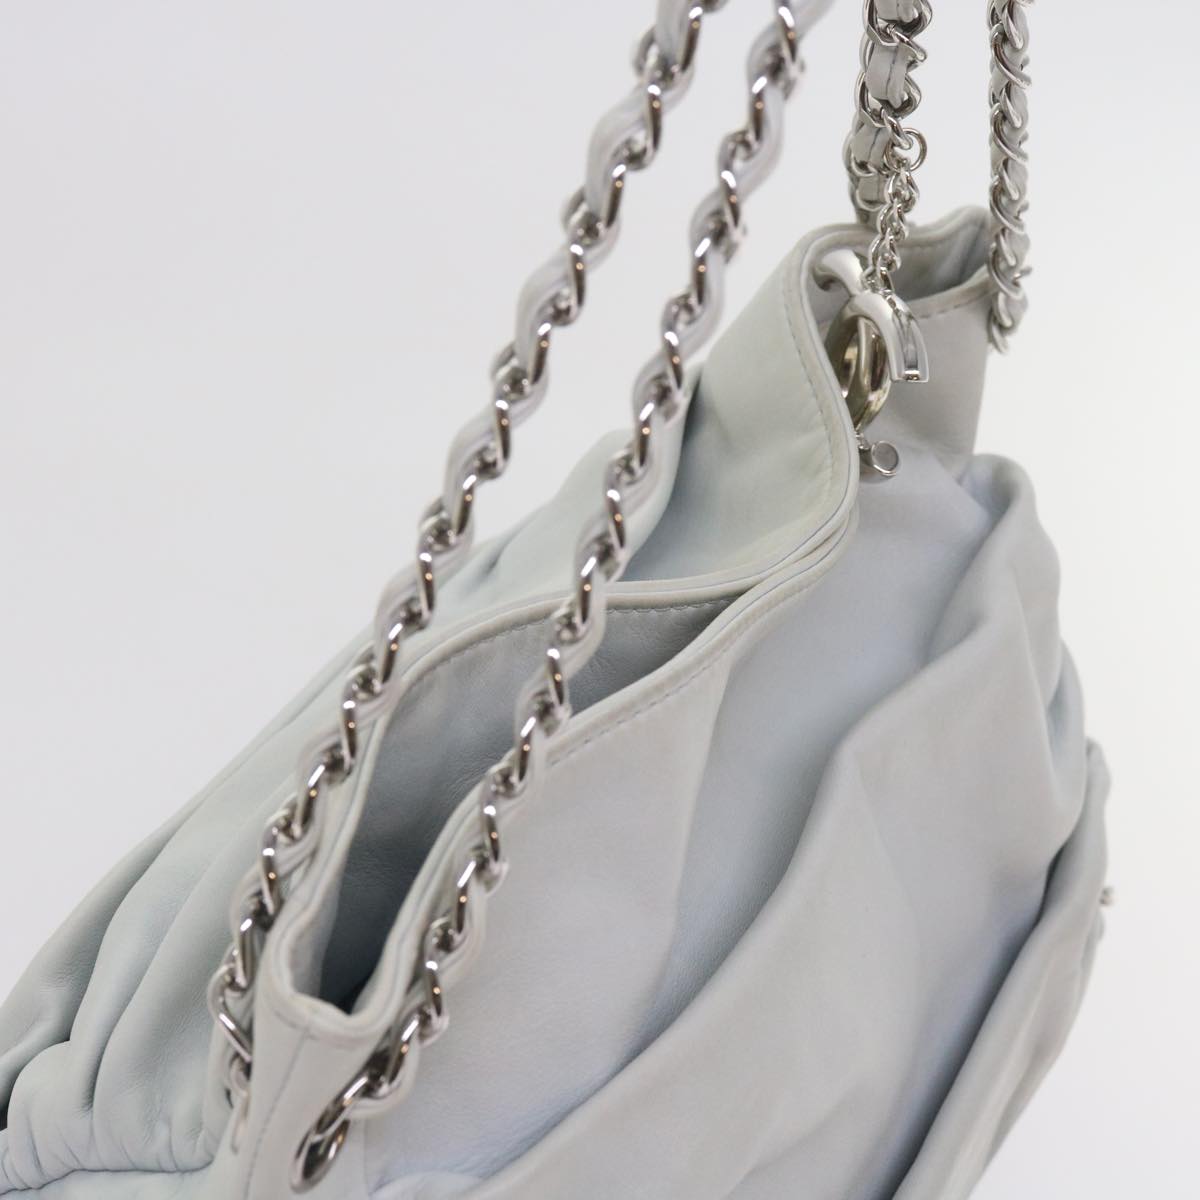 CHANEL Chain Shoulder Bag Leather White CC Auth bs10195